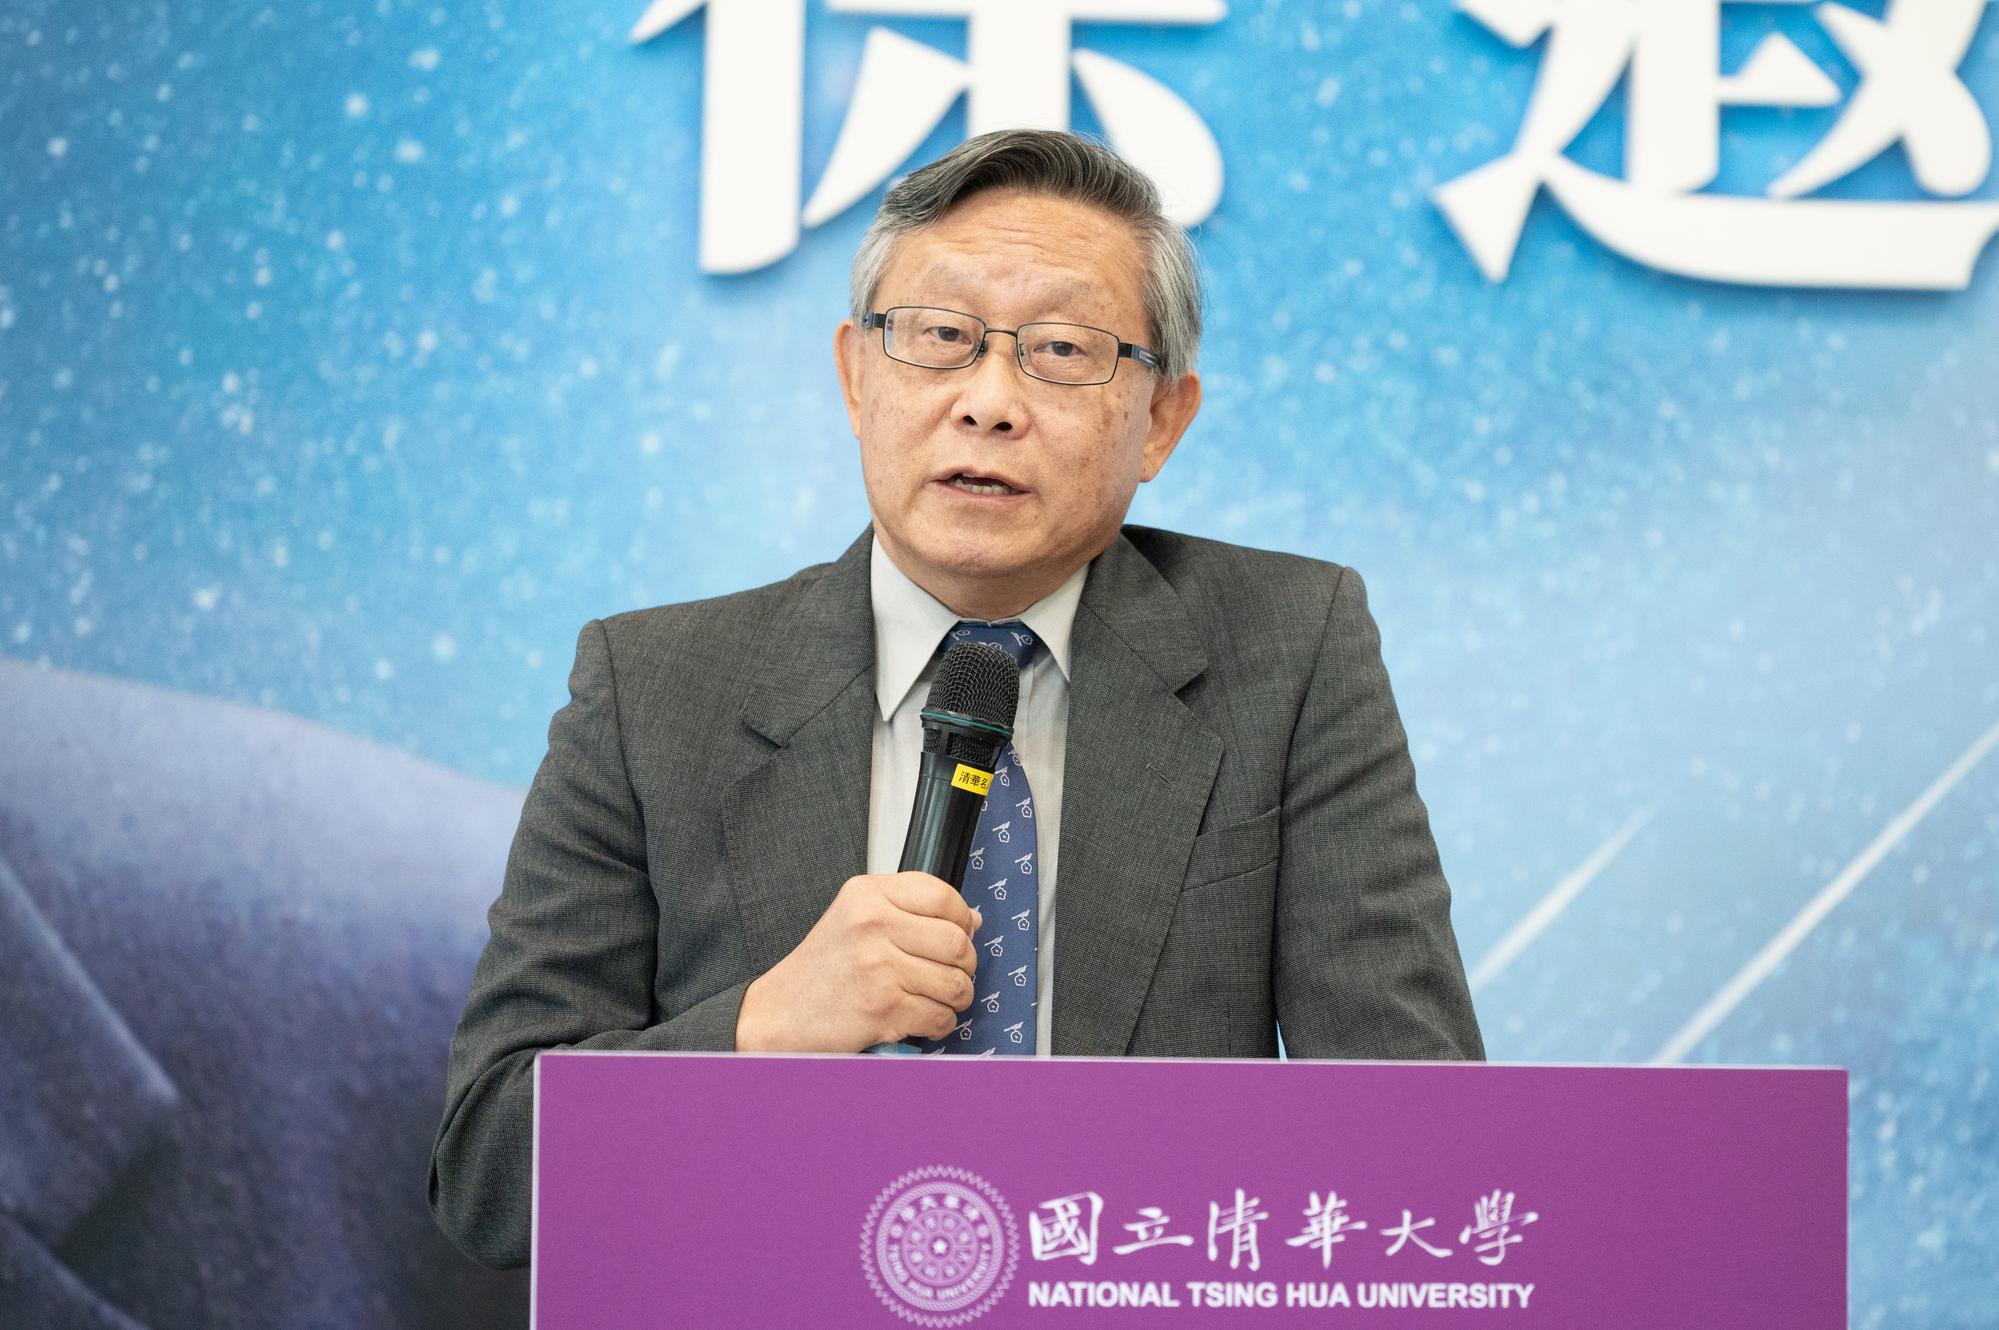 Former President Hocheng Hong (賀陳弘) stated that President-Emeritus Frank H. Shu (徐遐生) made significant reforms to the general education system, which had a profound impact on NTHU.